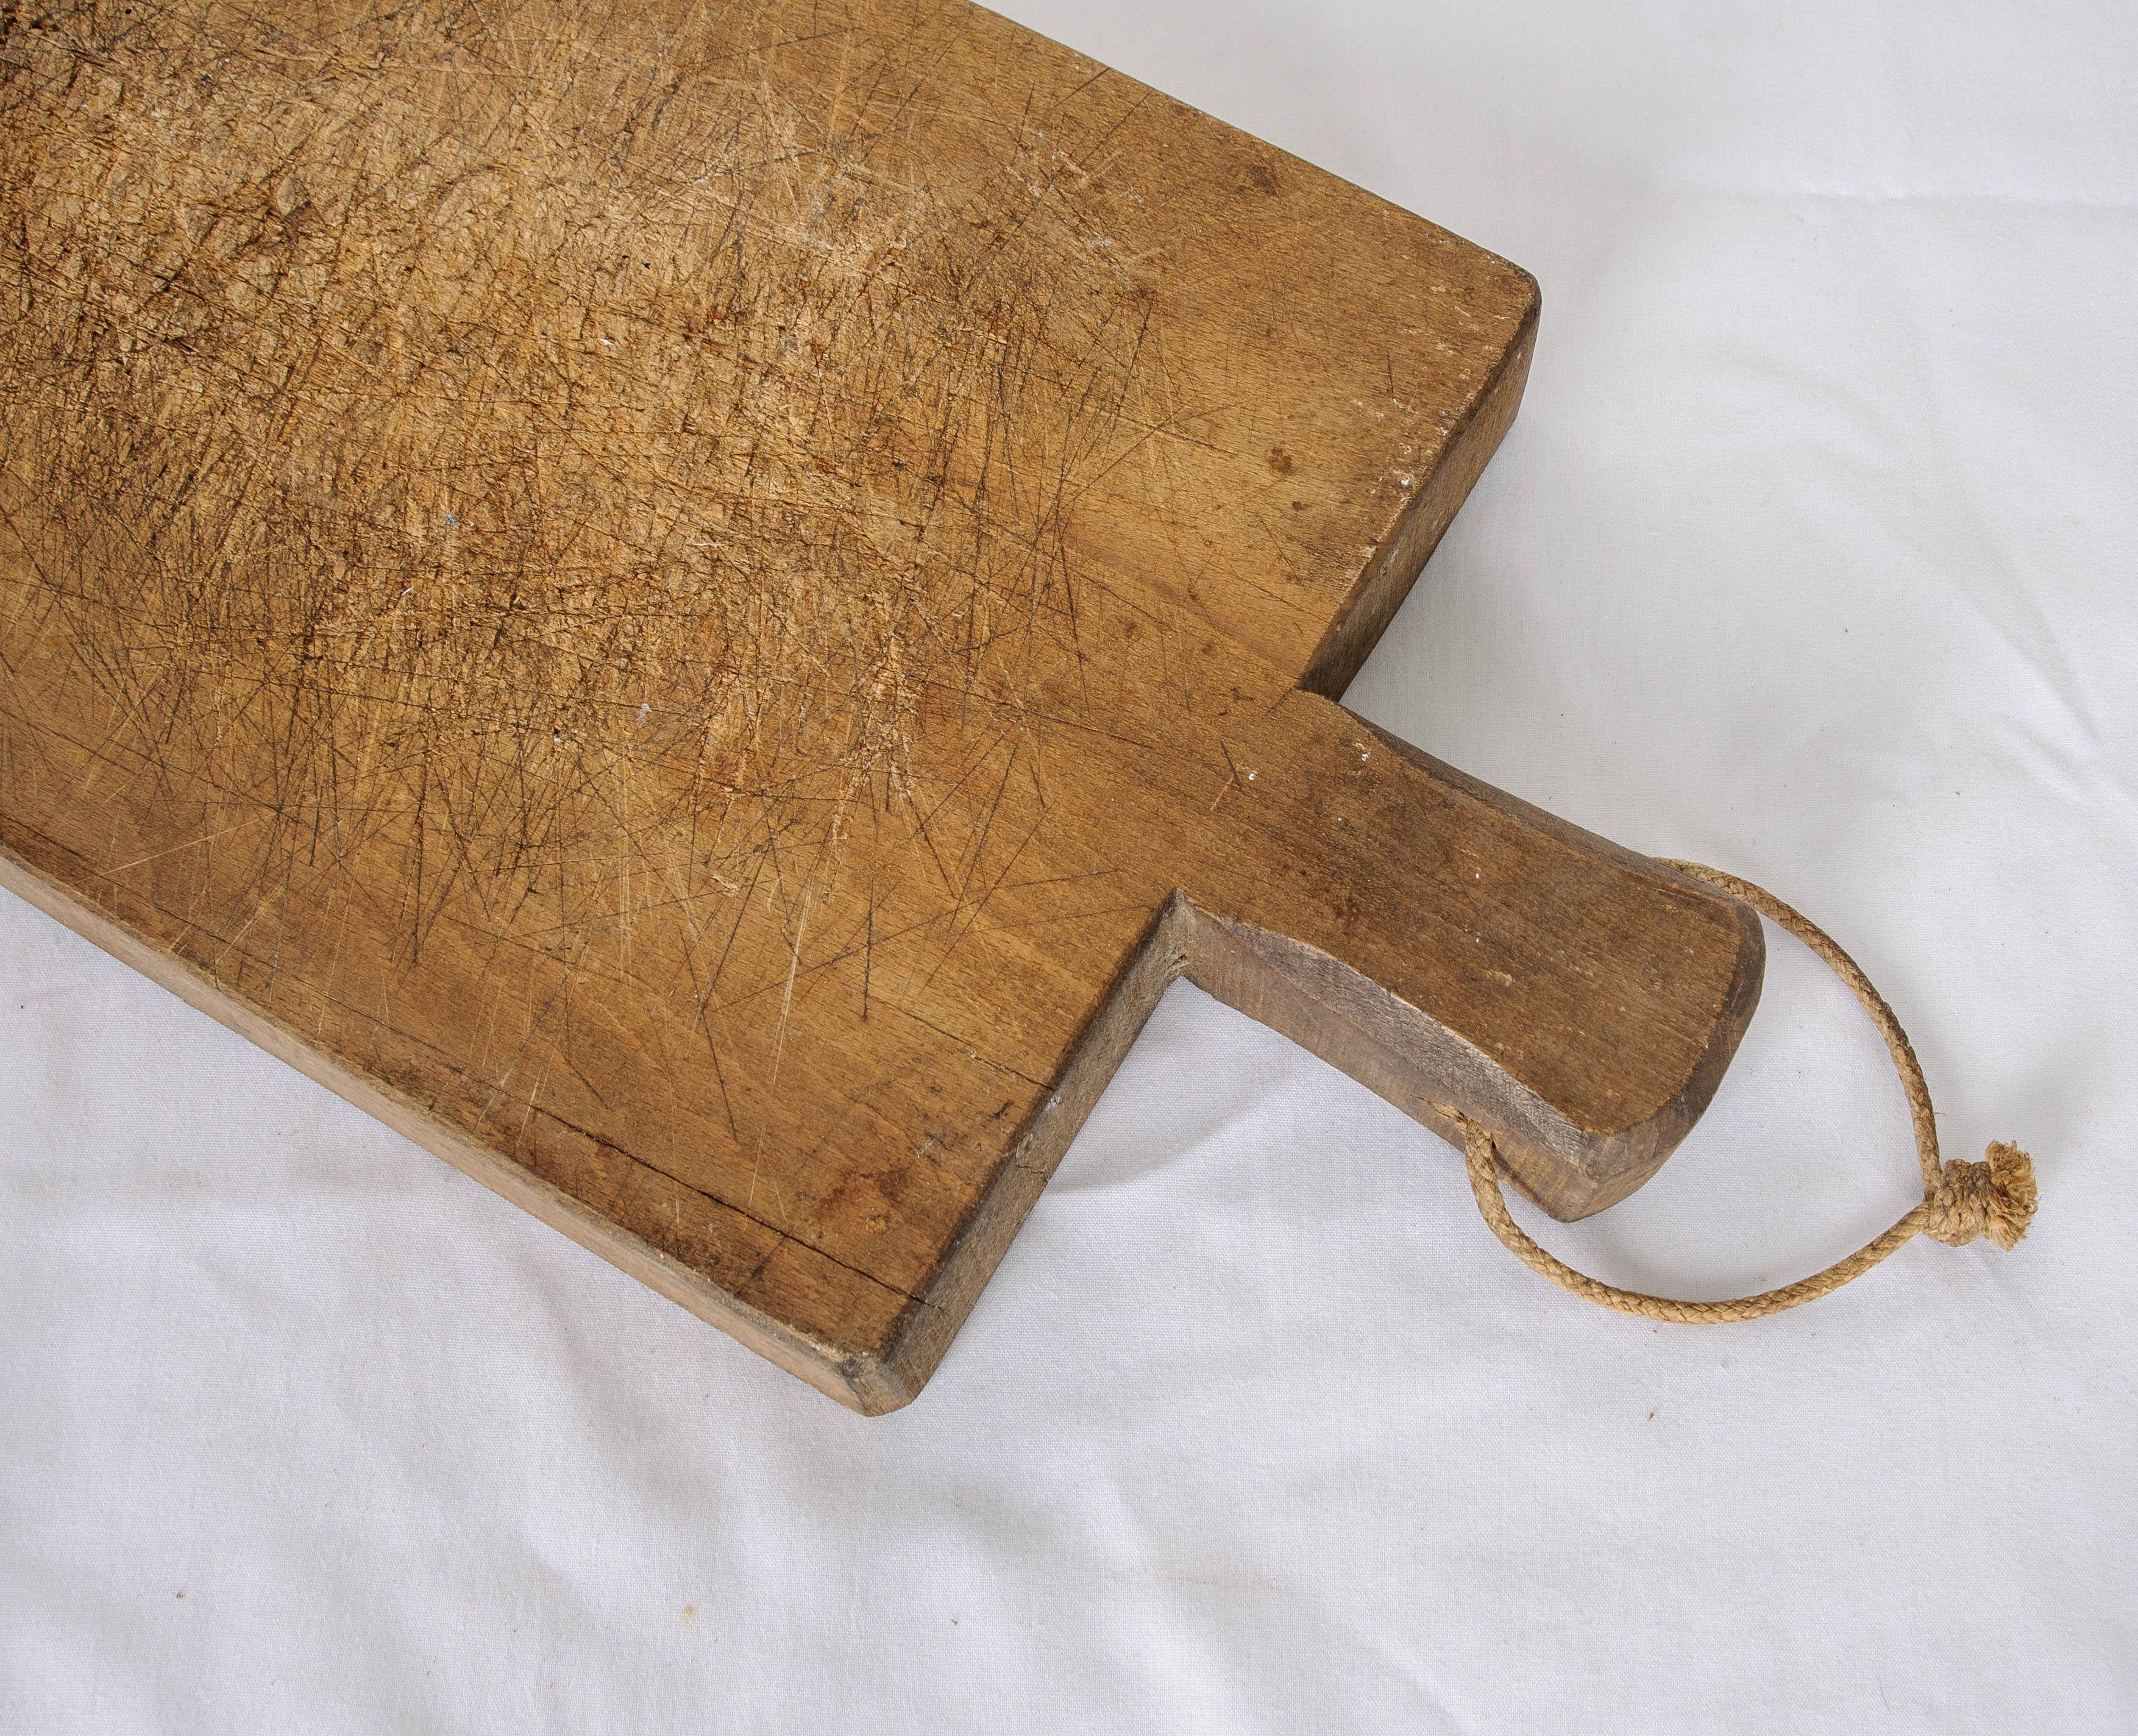 Countless marks have been left by chefs’ knives all-over this wonderful French breadboard. Made in France circa 1900, this board has helped slice up many-a-baguette! A handle provides a place to hold or hang the antique kitchen implement. These